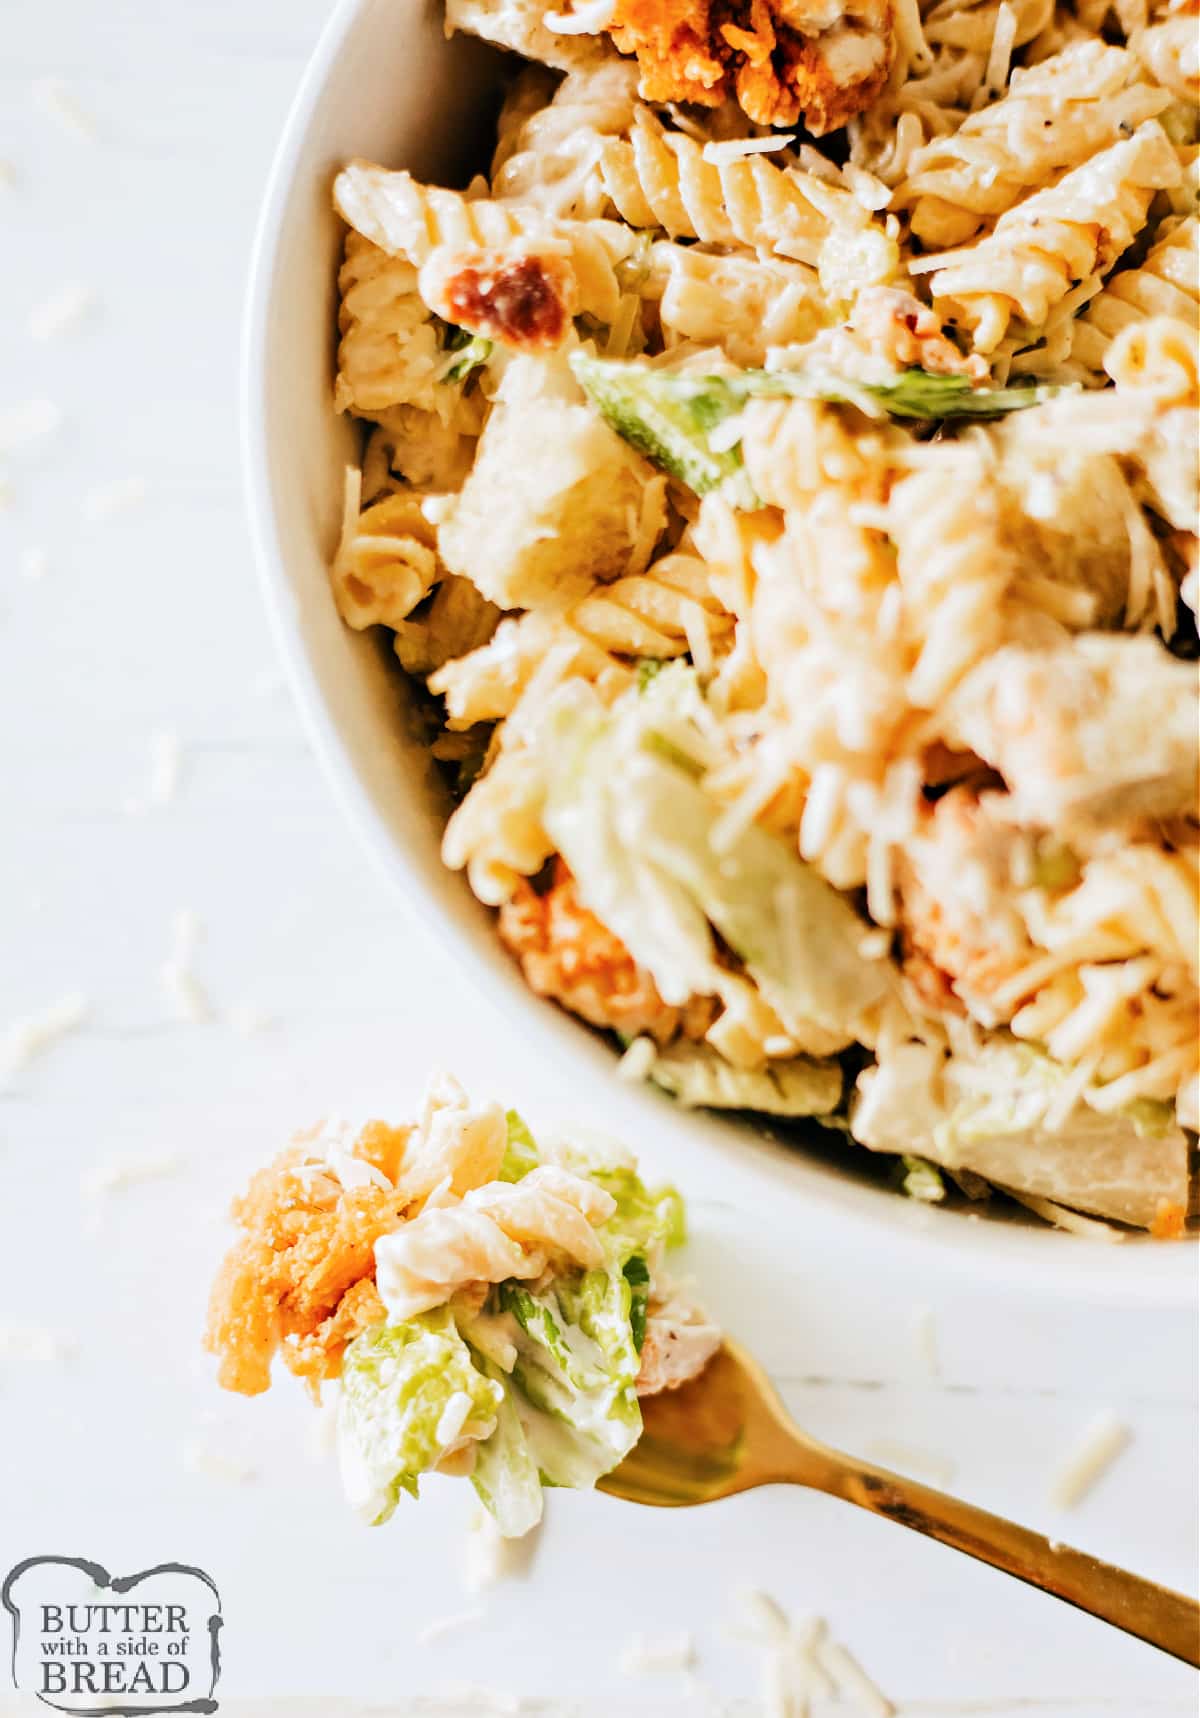 Bite of pasta salad with Caesar dressing, chicken, and croutons. 